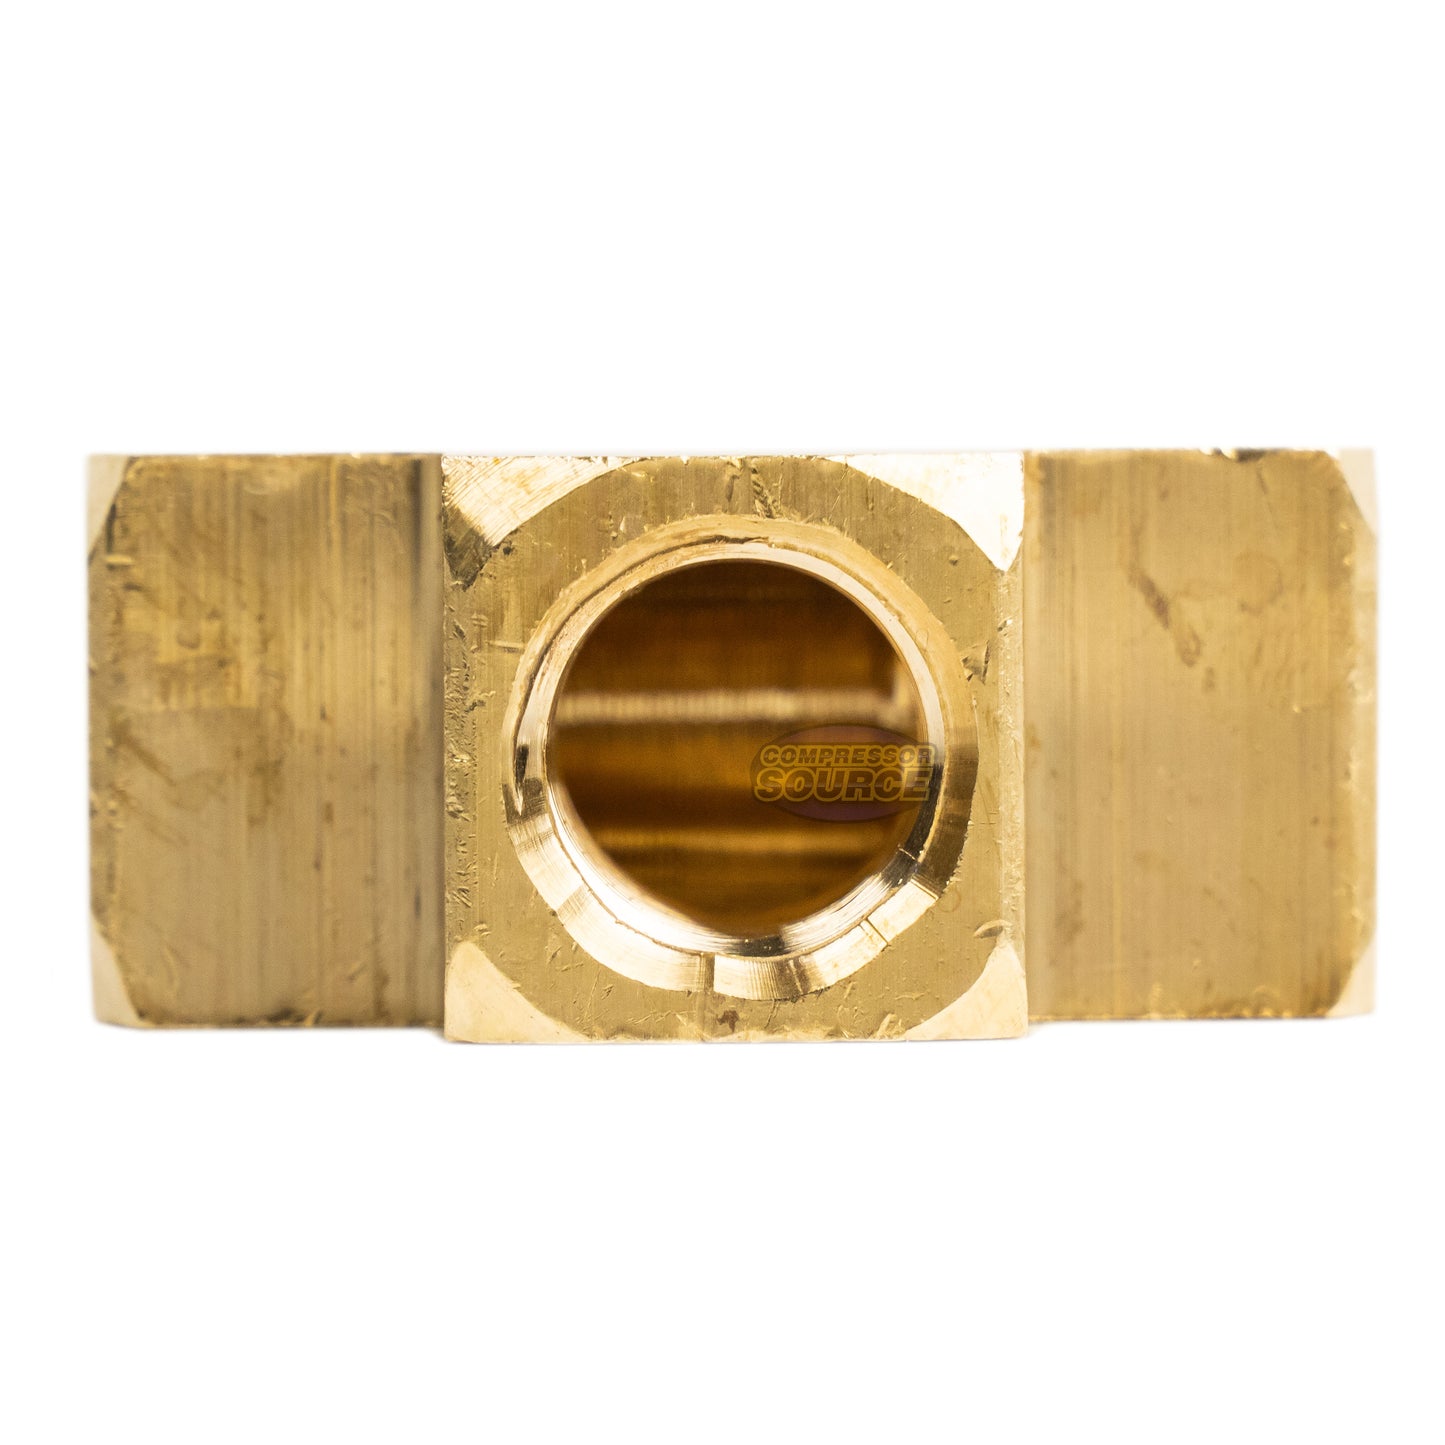 1/4" FNPT Brass Tee Pipe Fitting .25" T-Fitting Solid Brass Connector